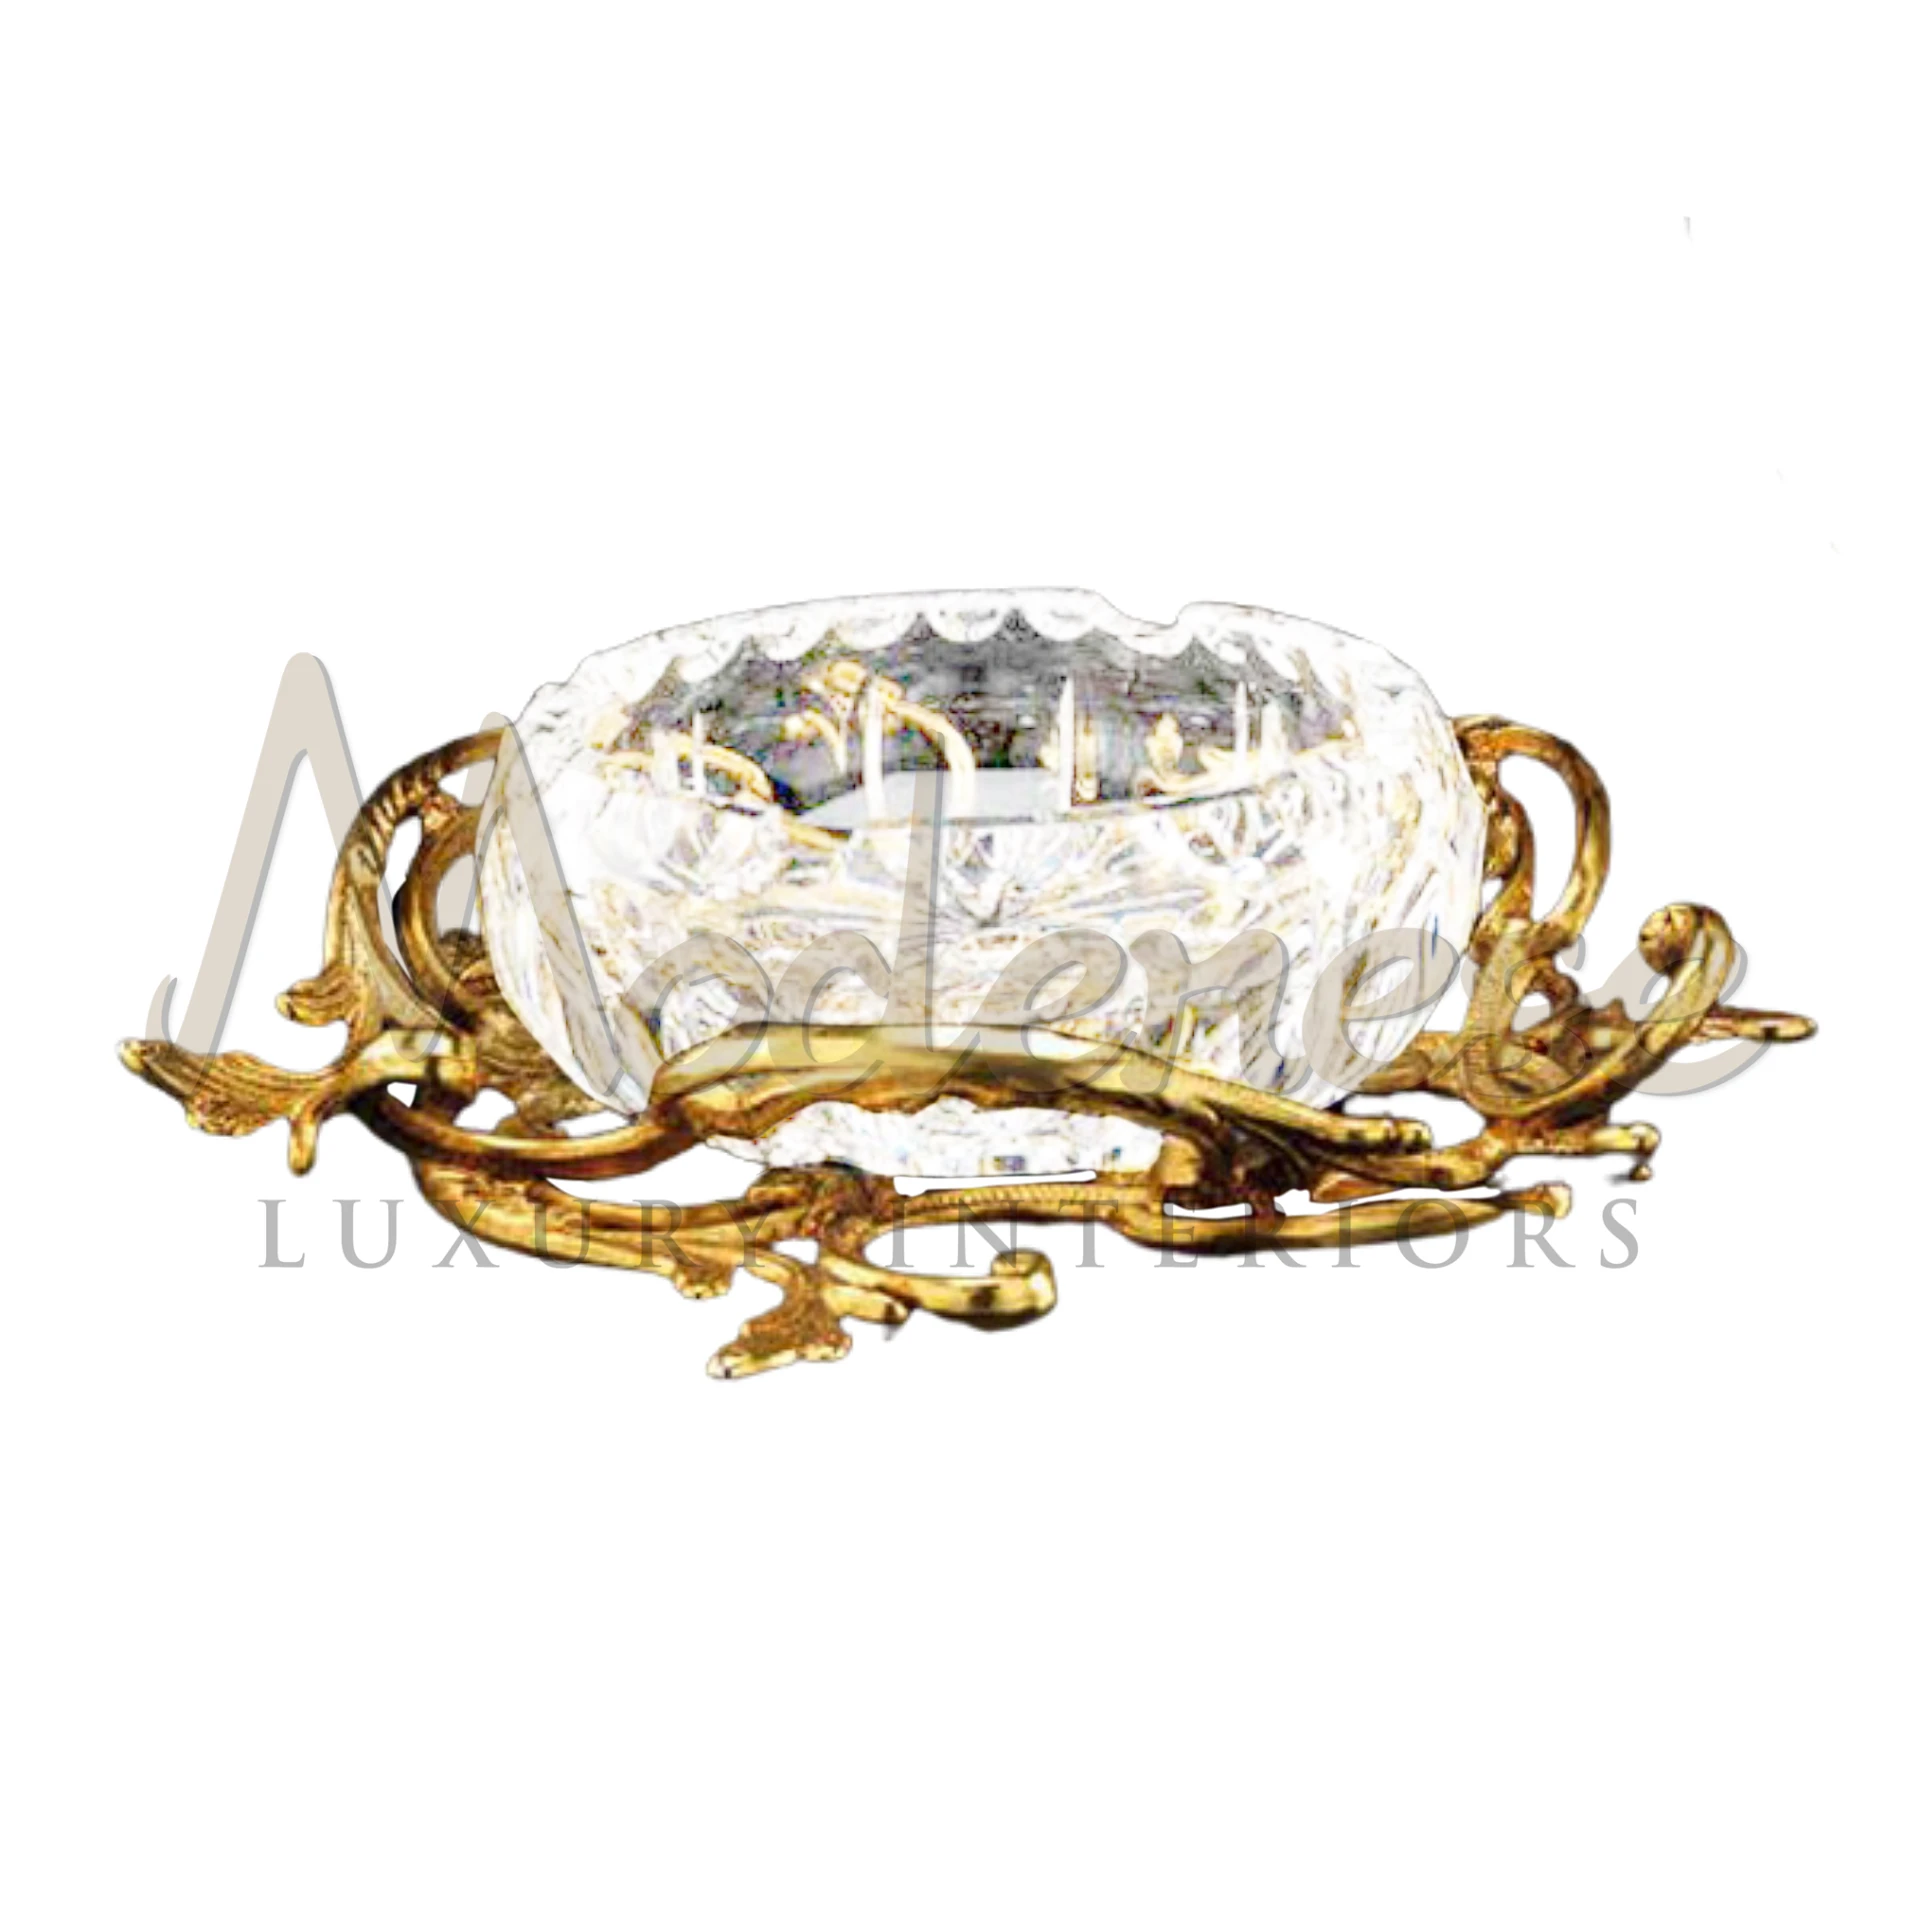 Exquisite Crystal Bowl, a luxury vase in baroque style, ideal for interior designers enhancing classic and luxury interiors.